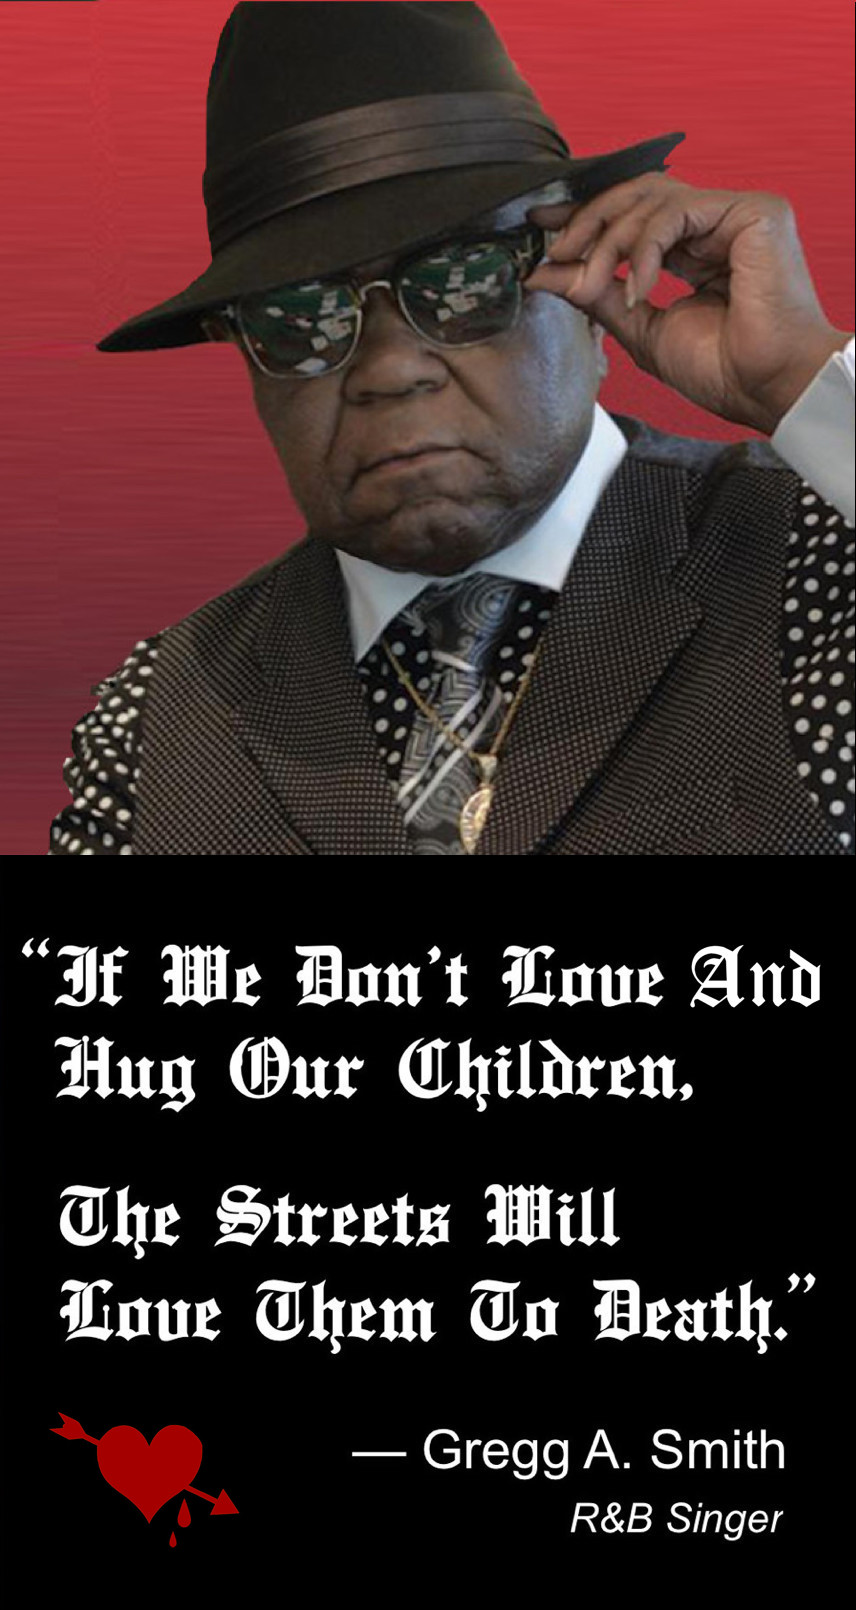 The Streets Will Love Them To Death Quote Meme Blank Meme Template